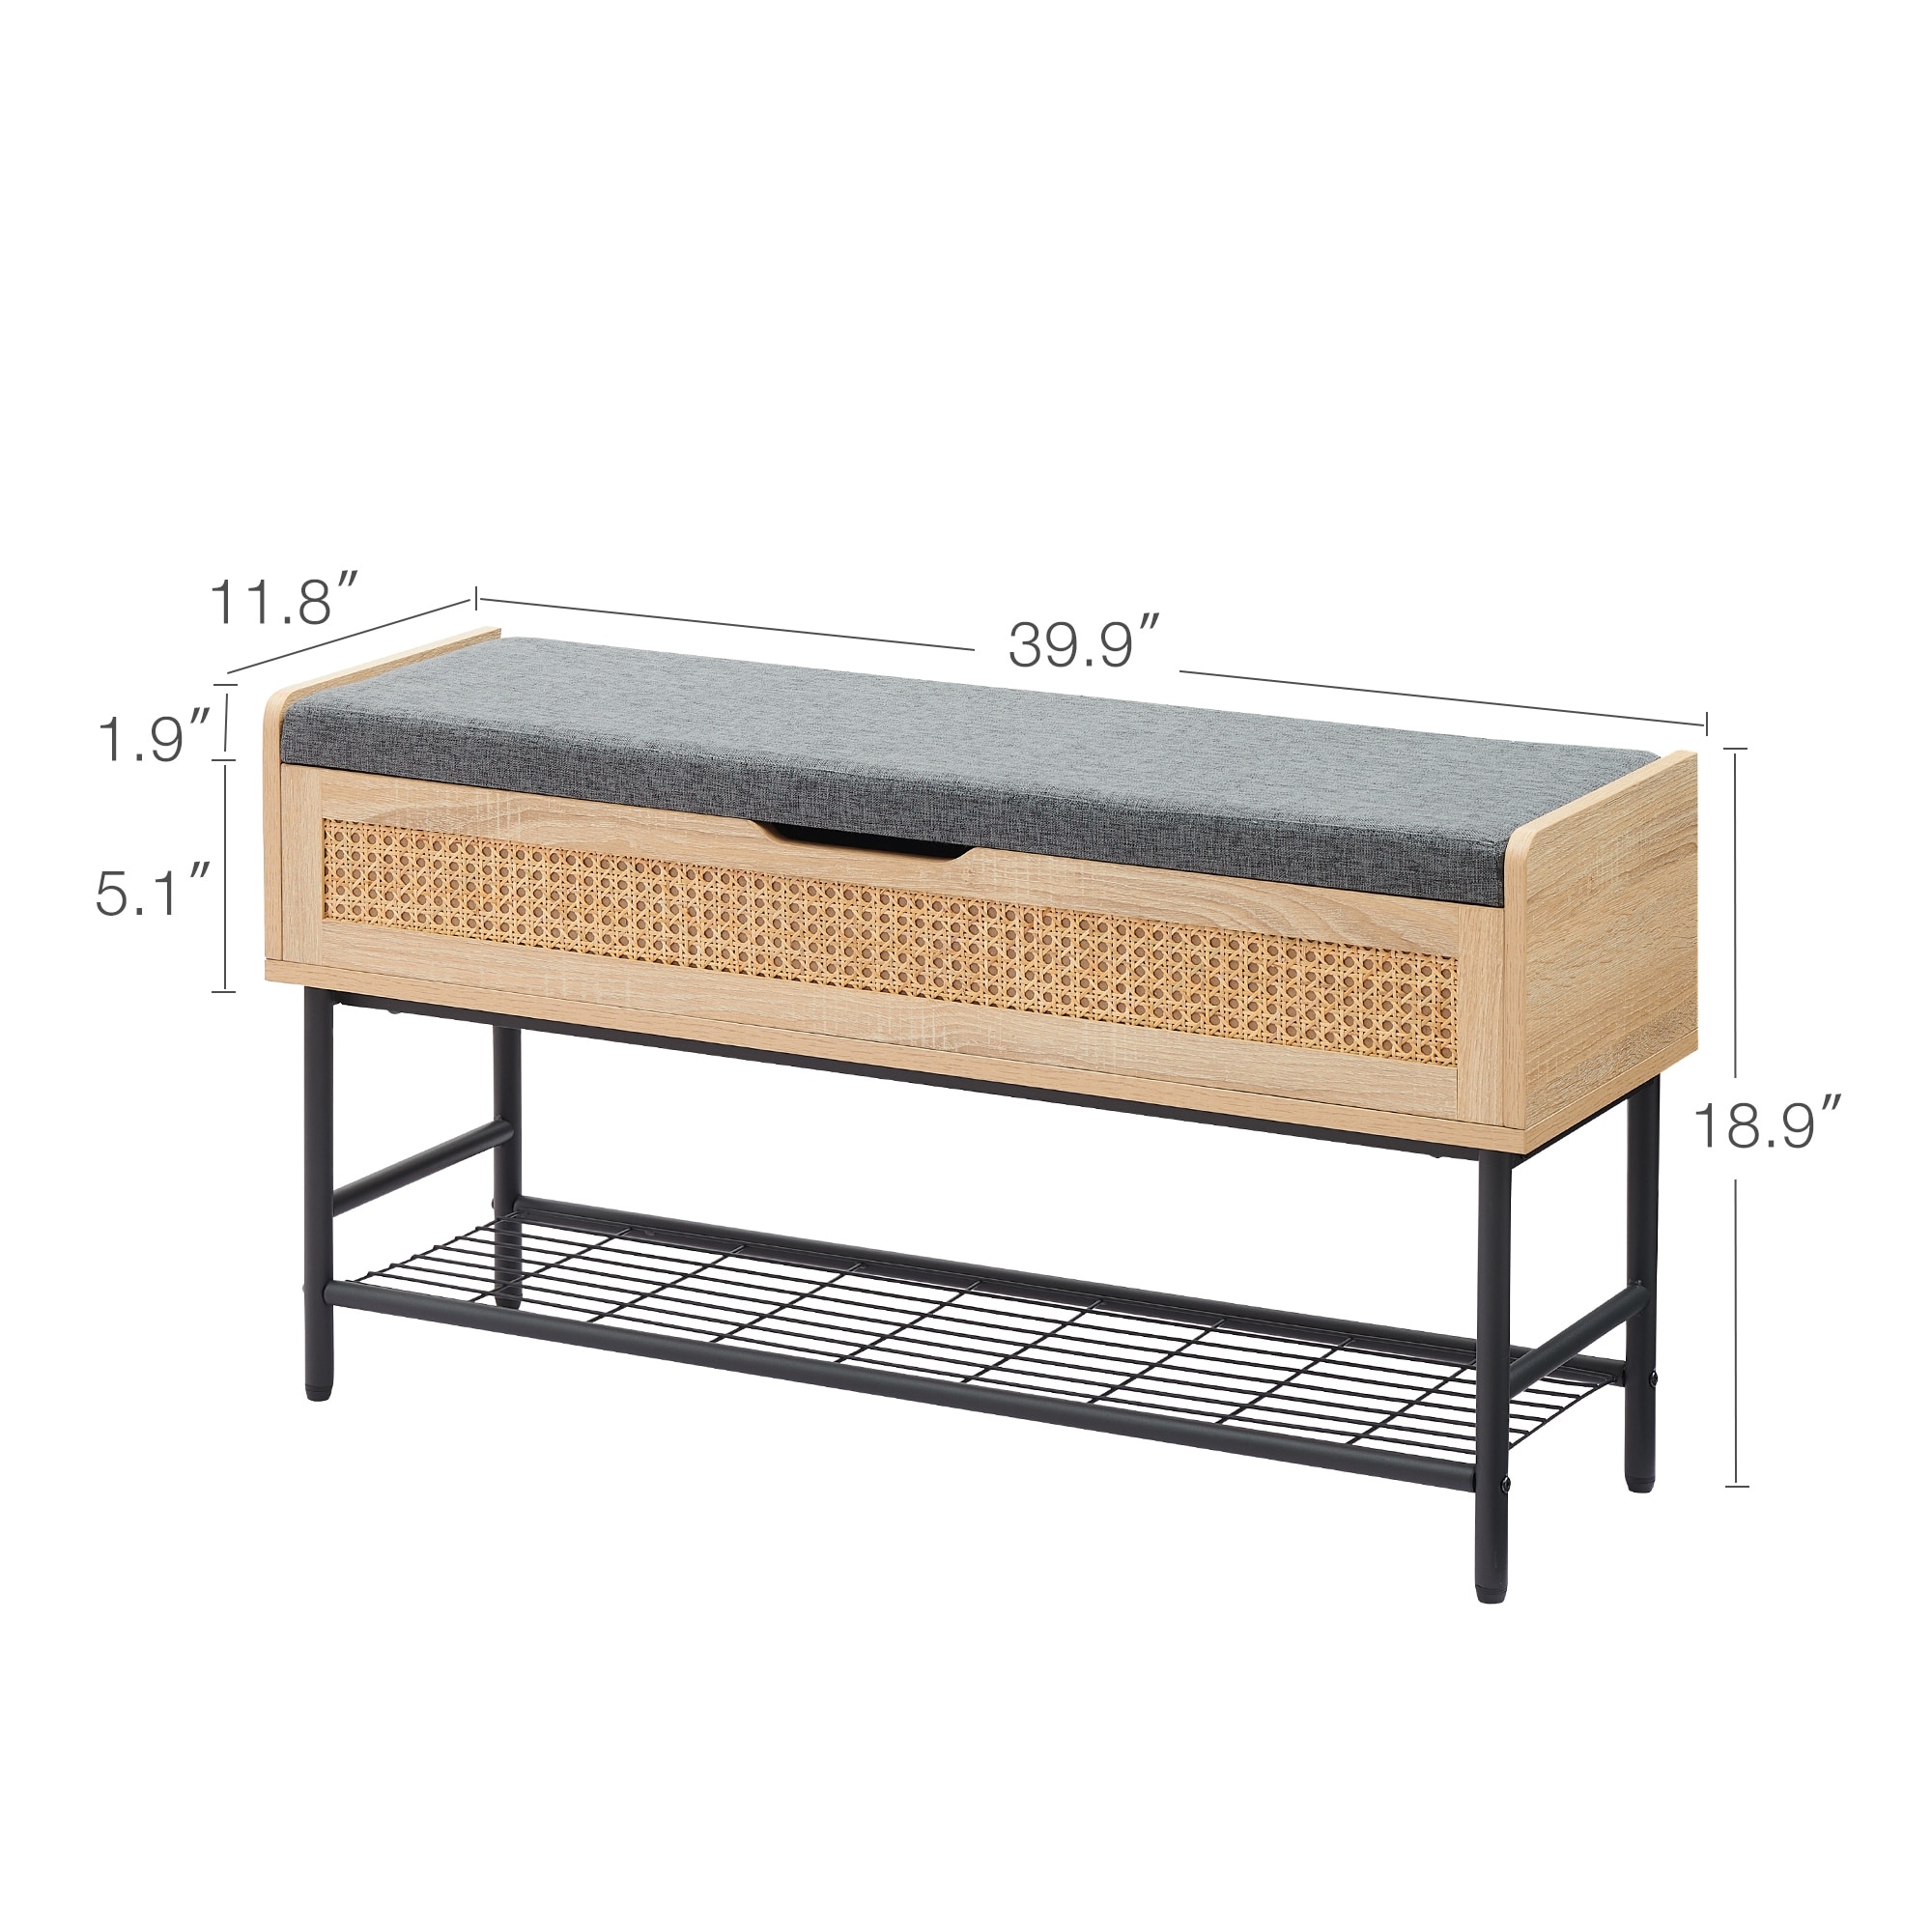 Ail Modern Upholstered Velvet Entryway Bench Luxurious Seating with Functional Storage - 11.8"L x 39.9"W x 18.9"H